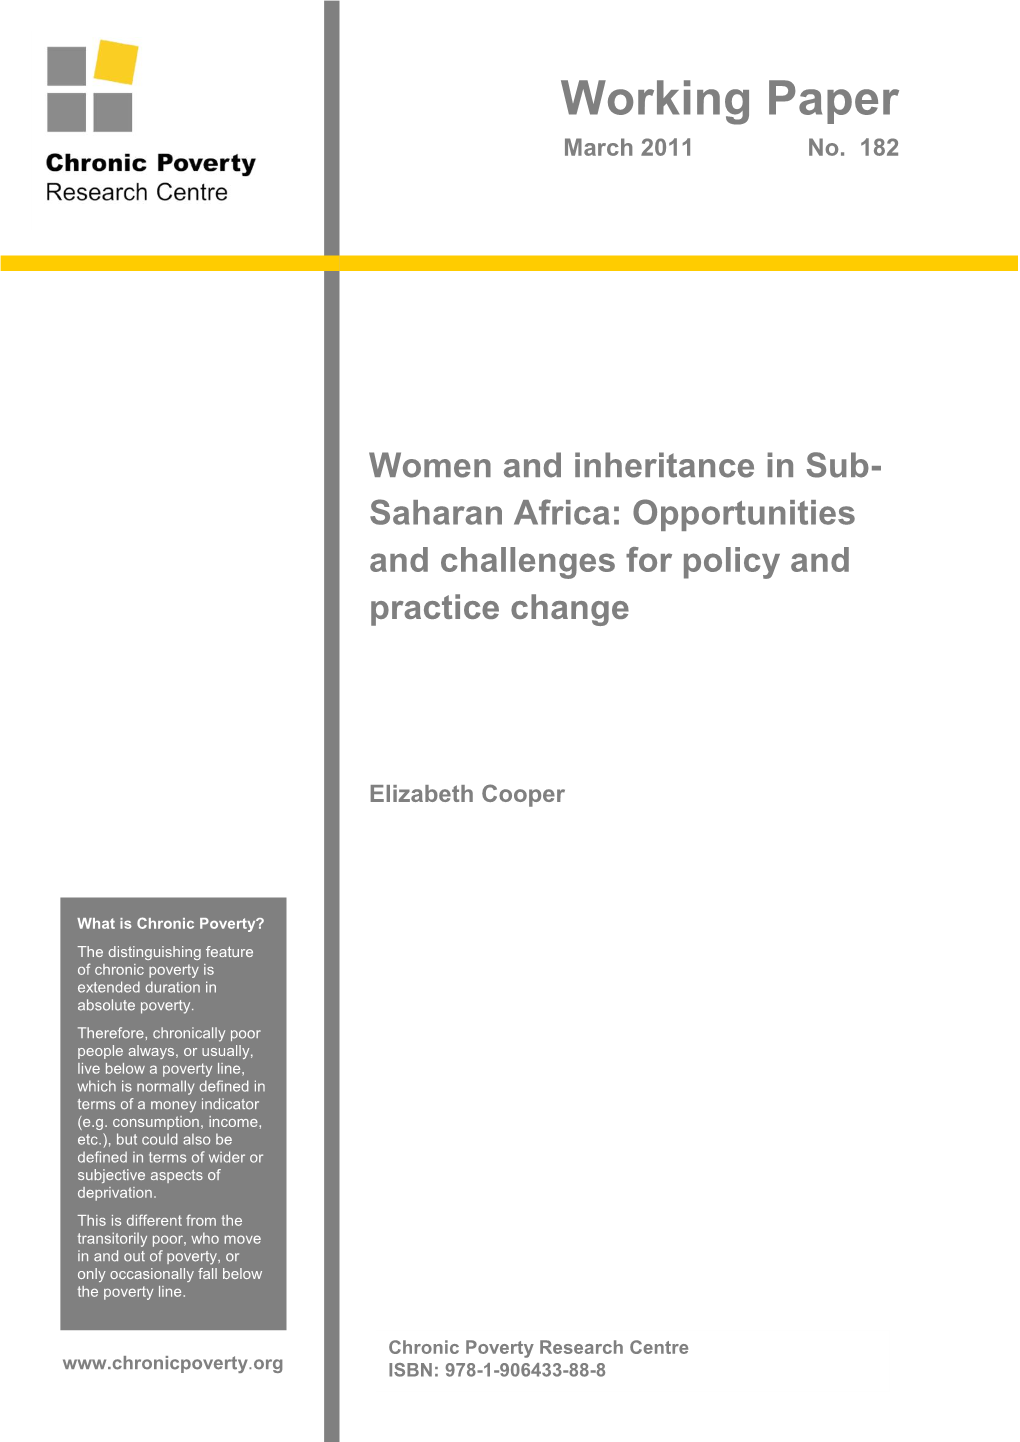 Women and Inheritance in Sub-Saharan Africa: Opportunites and Challenges for Policy and Practice Change